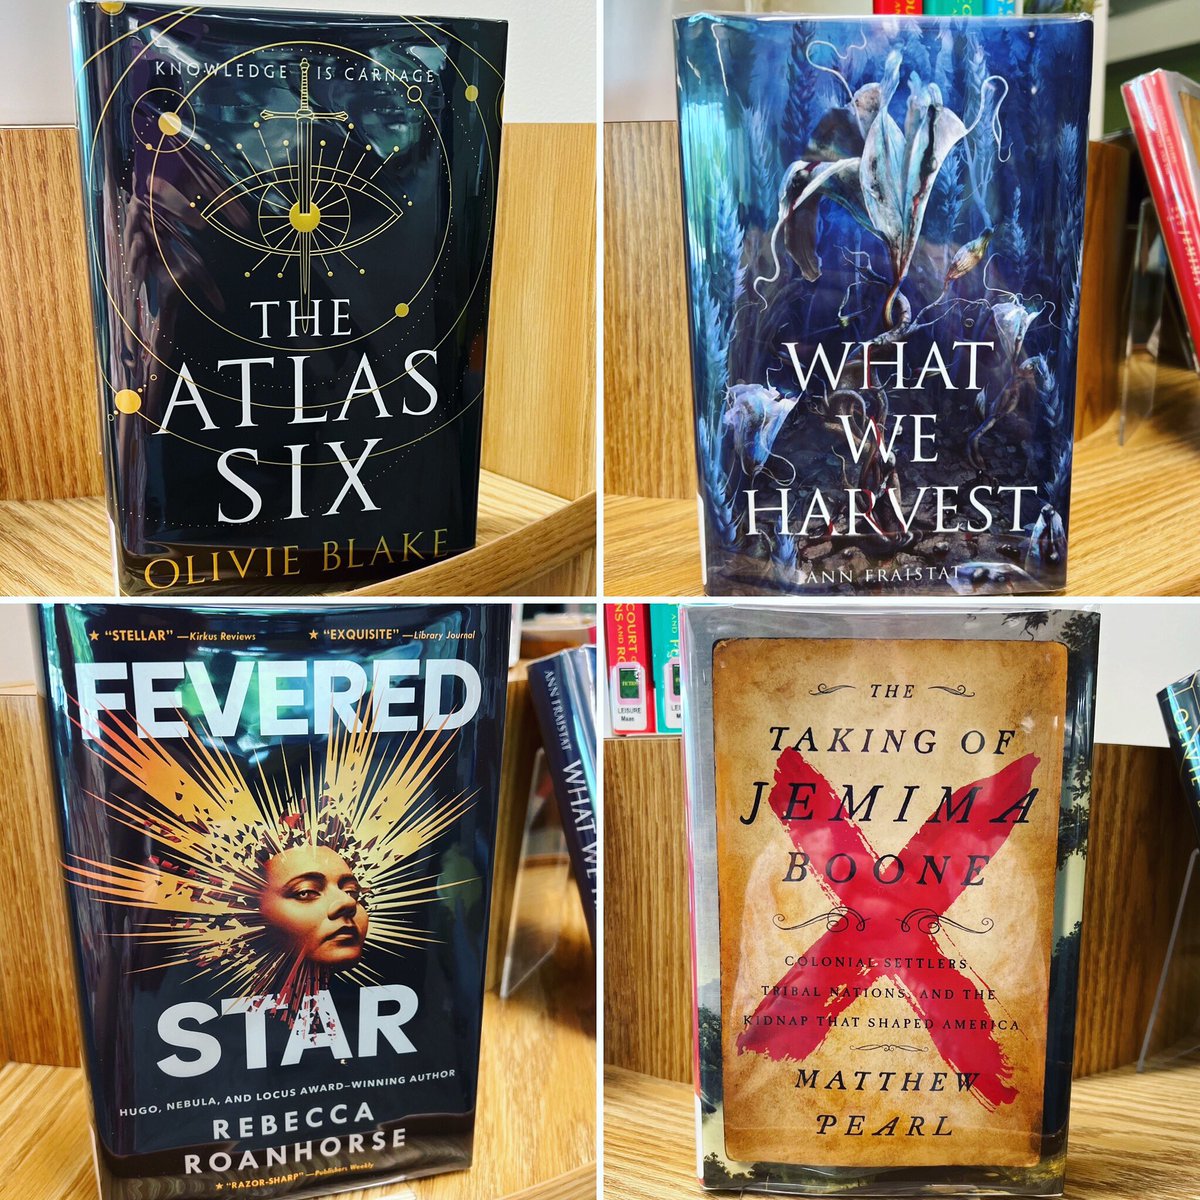 🚨 #FreshReadsFriday🚨 
New books are in the lib 🎉 

Book 1: The Atlas Six by @OlivieBlake 

Book 2: What We Harvest by @annfrai 

Book 3: Fevered Star by @RoanhorseBex 

Book 4: The Taking of Jemima Boone by @MatthewPearl 

#FalconsAtTheLib  #LibrariesAreForEveryone